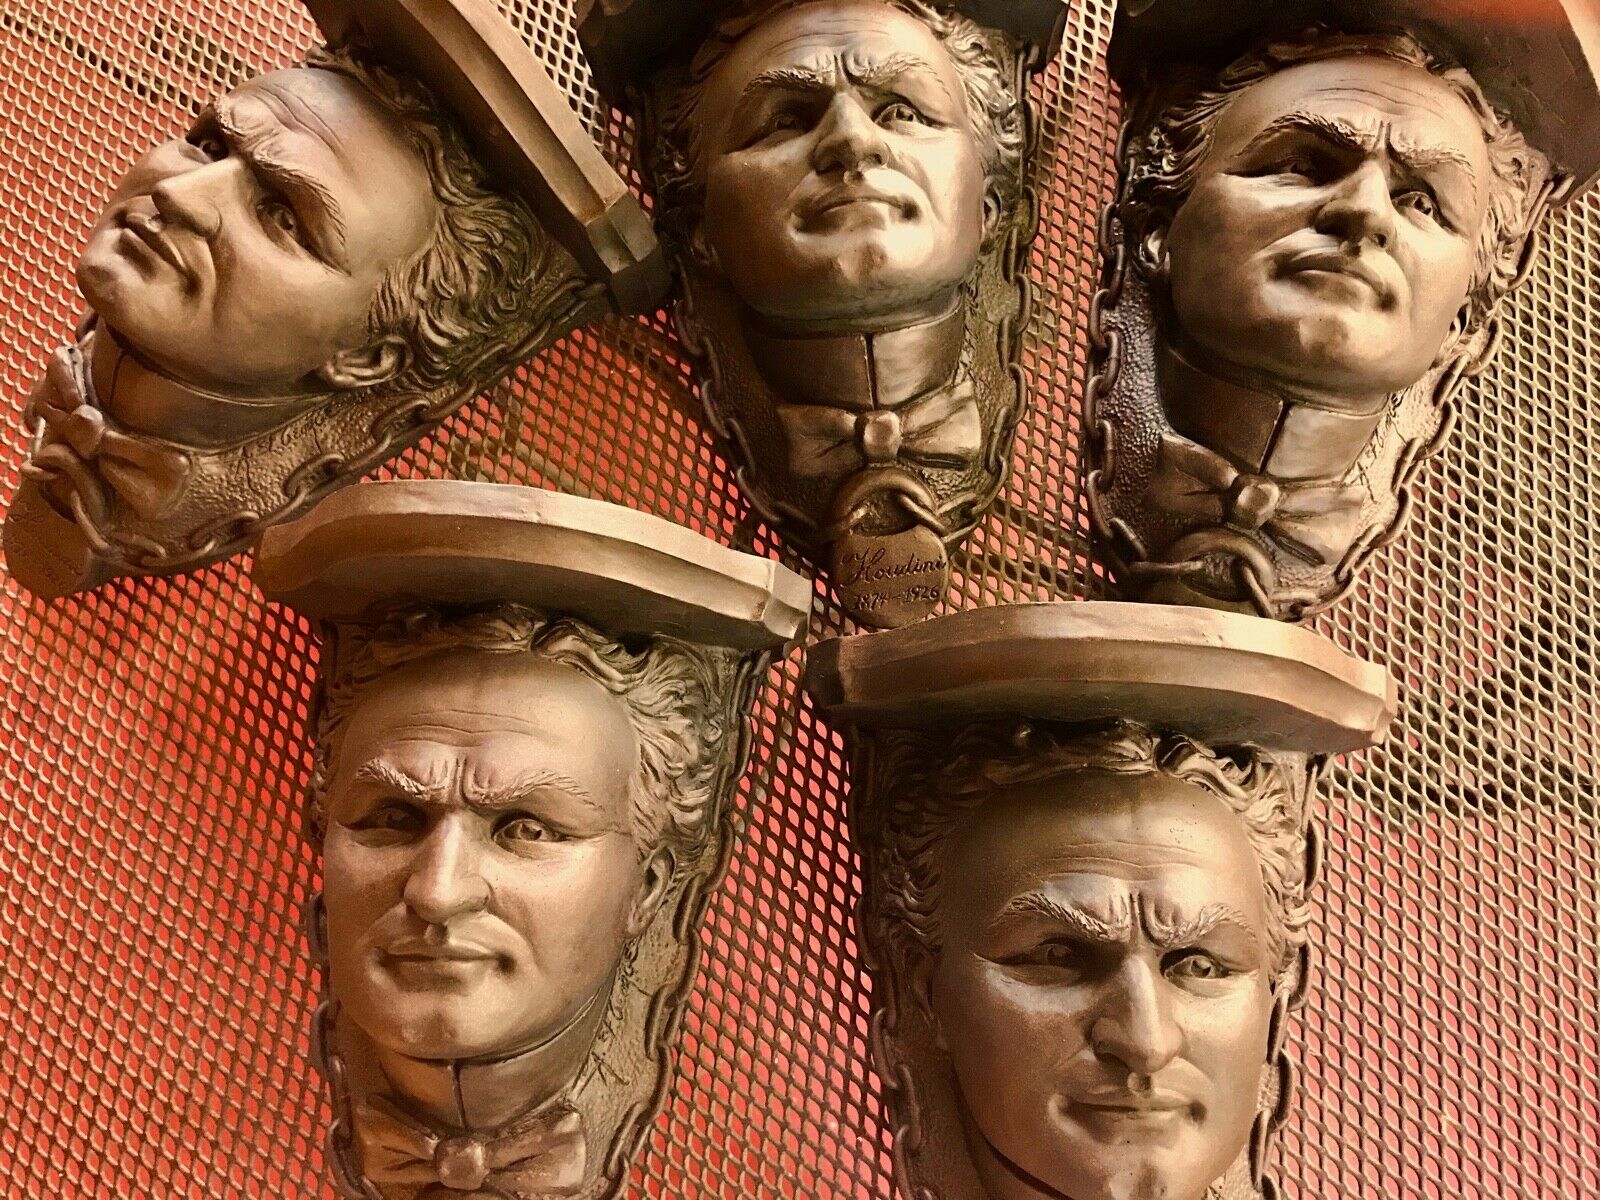 HOUDINI WALL SHELF in Gold of the most famous face in magic